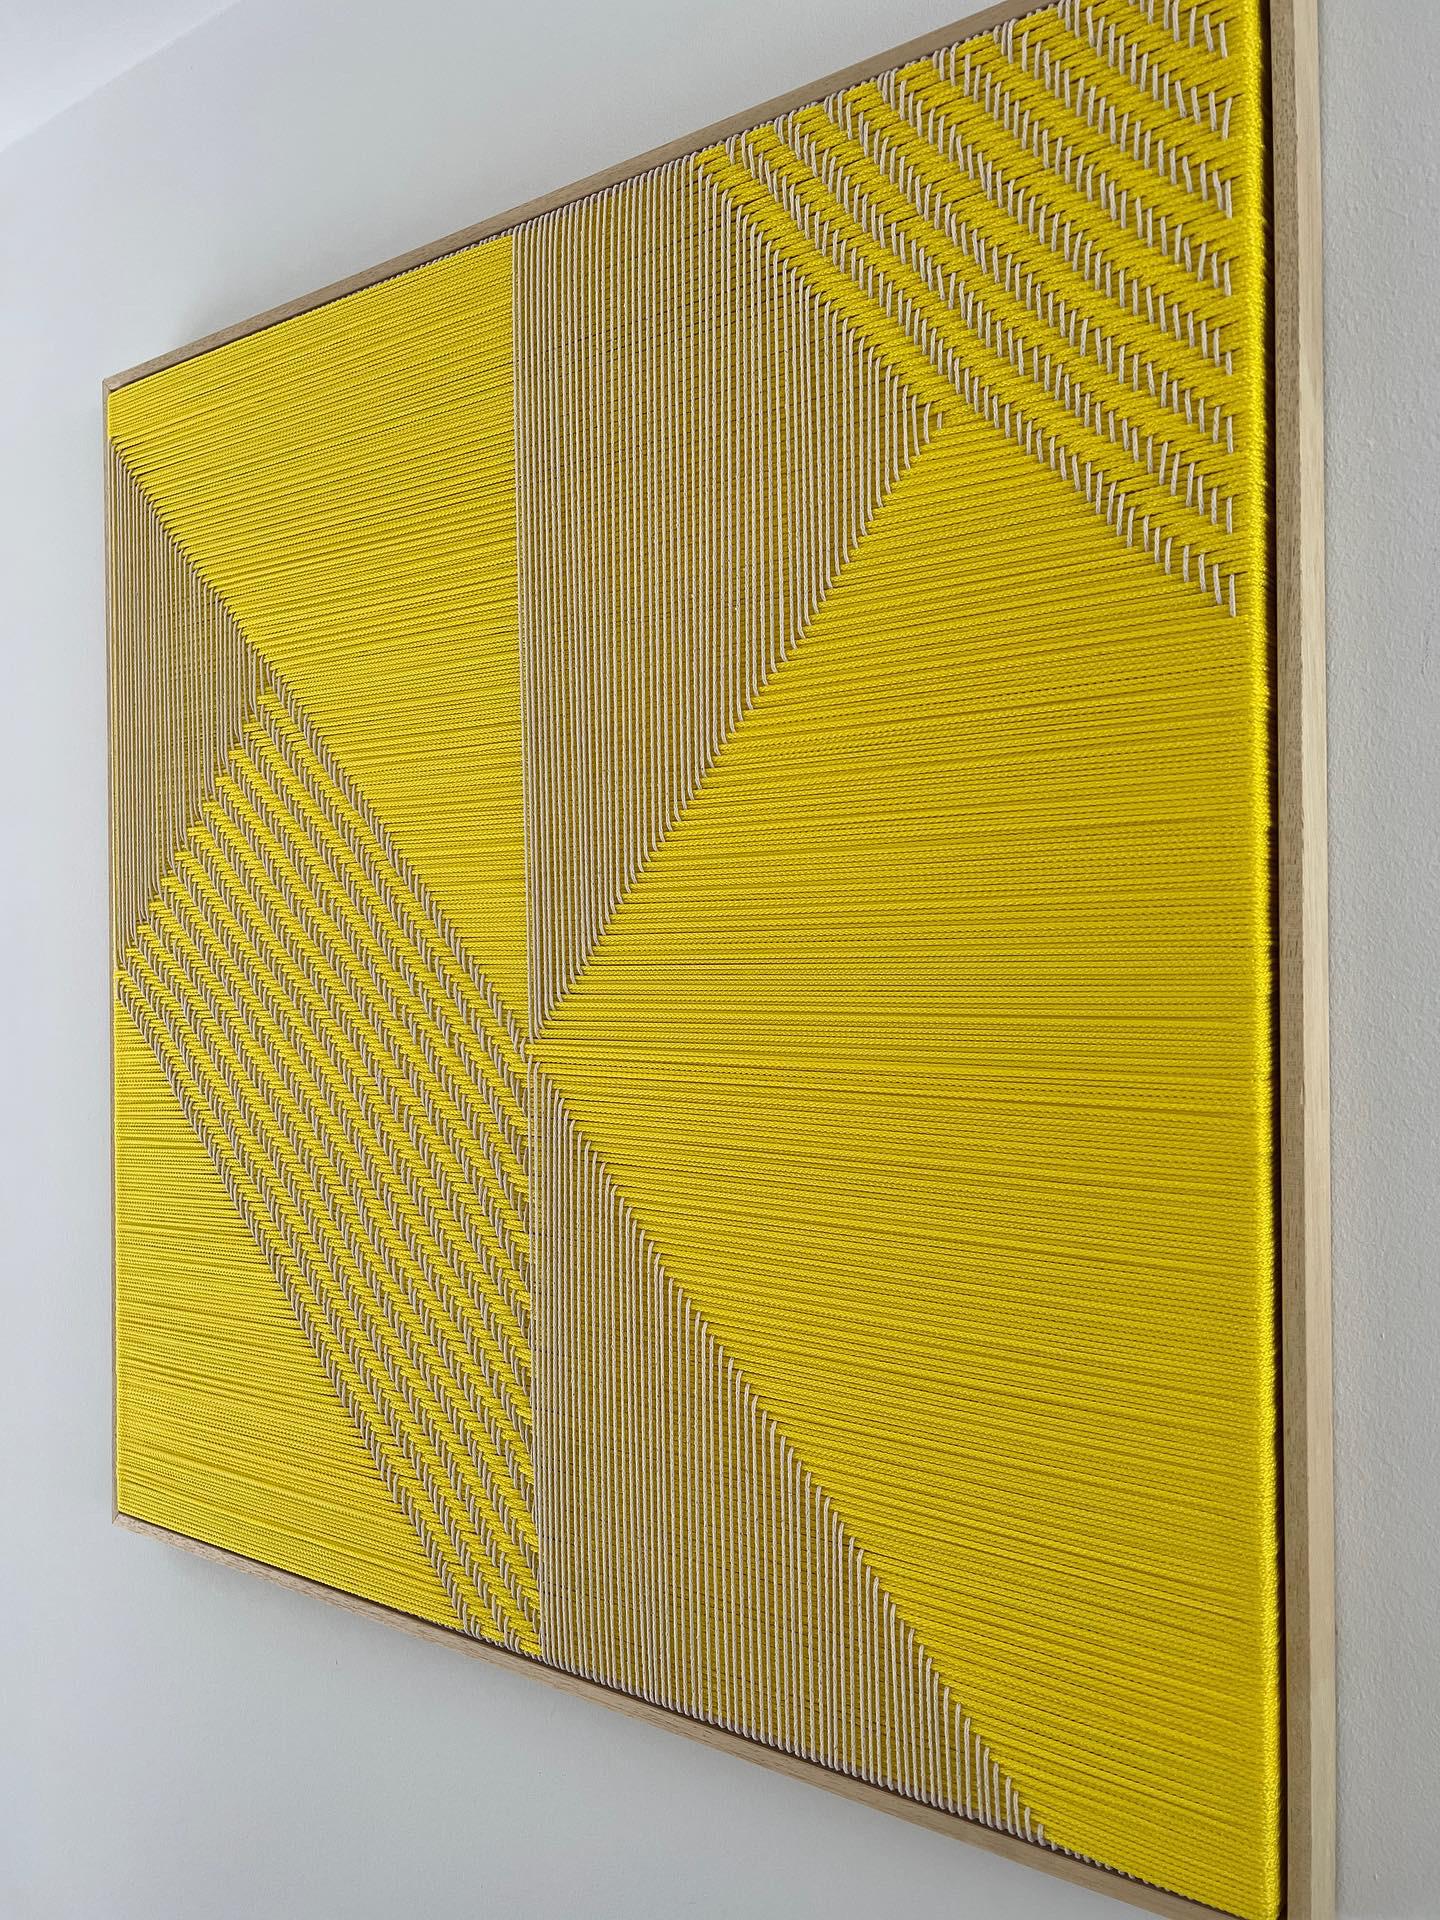 Grid Yellow
Textile Art, Cotton, Handmade
Free style weaving
80x80cm
2023

About the artist

Matthias De Vogel

The Textile art studio Fault Lines is Founded in 2015 by Matthias de Vogel. Matthias lived and worked for several years in Paris and San